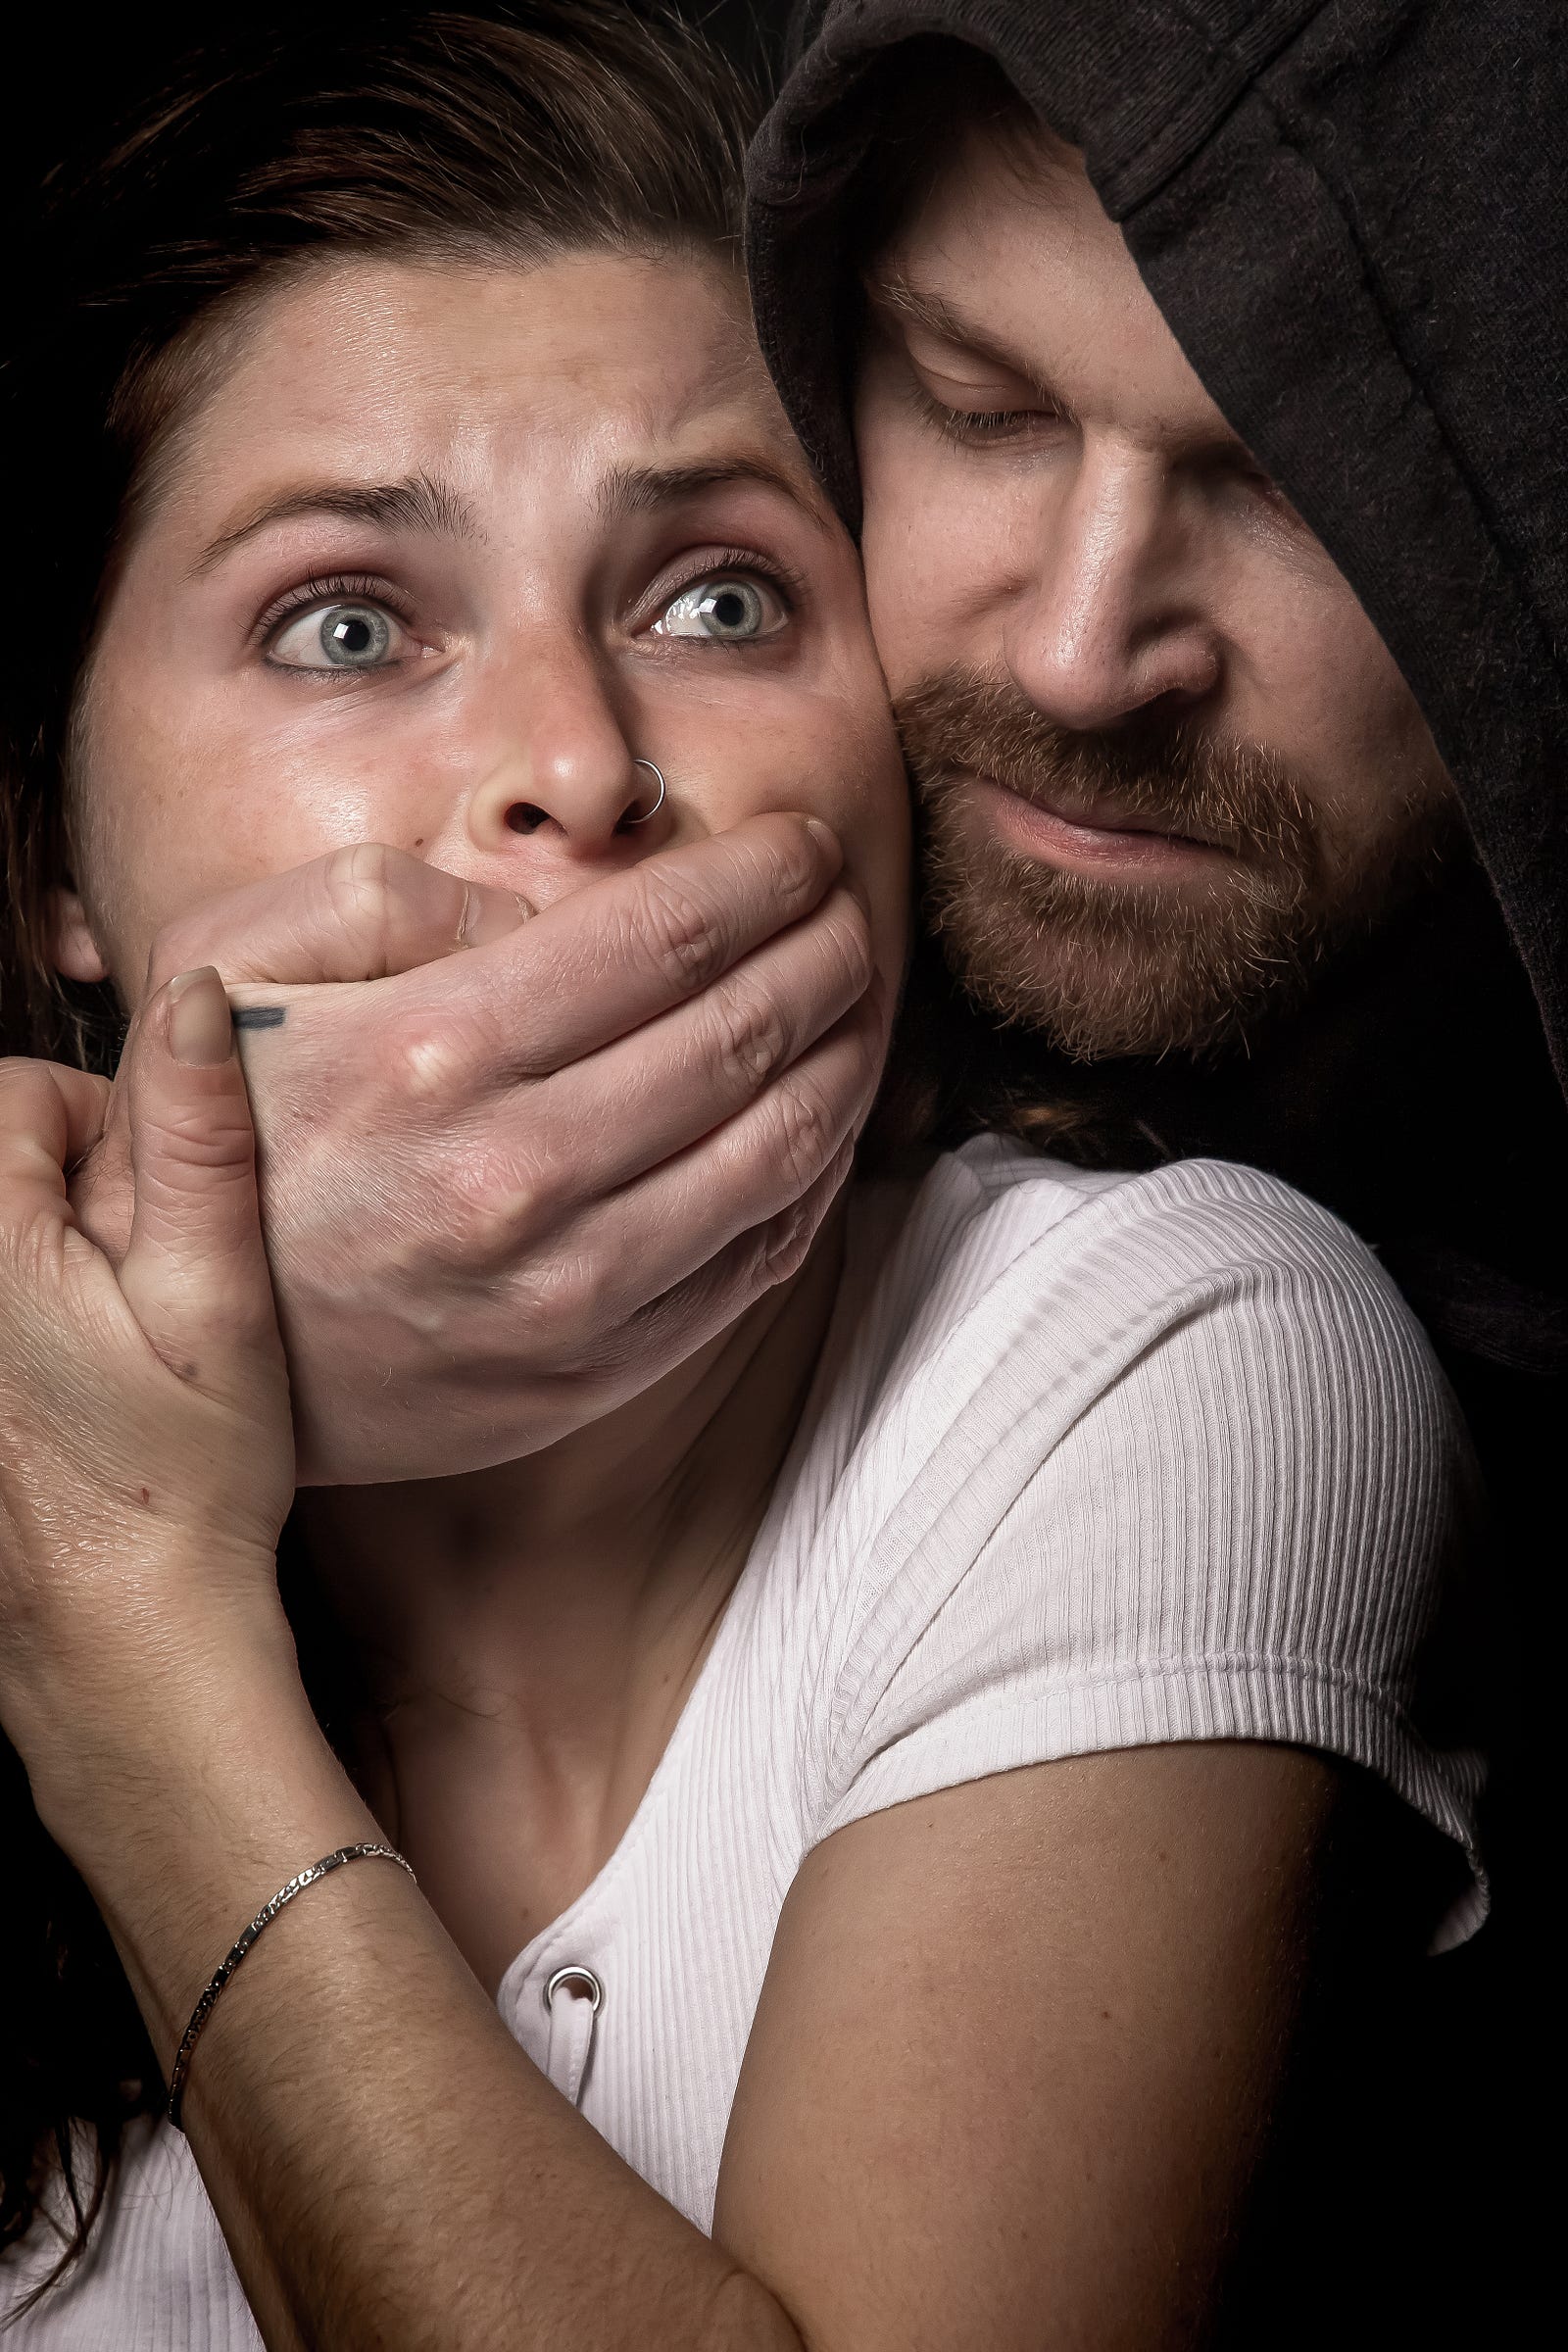 A hooded man covers the mouth of a female kidnap victim.